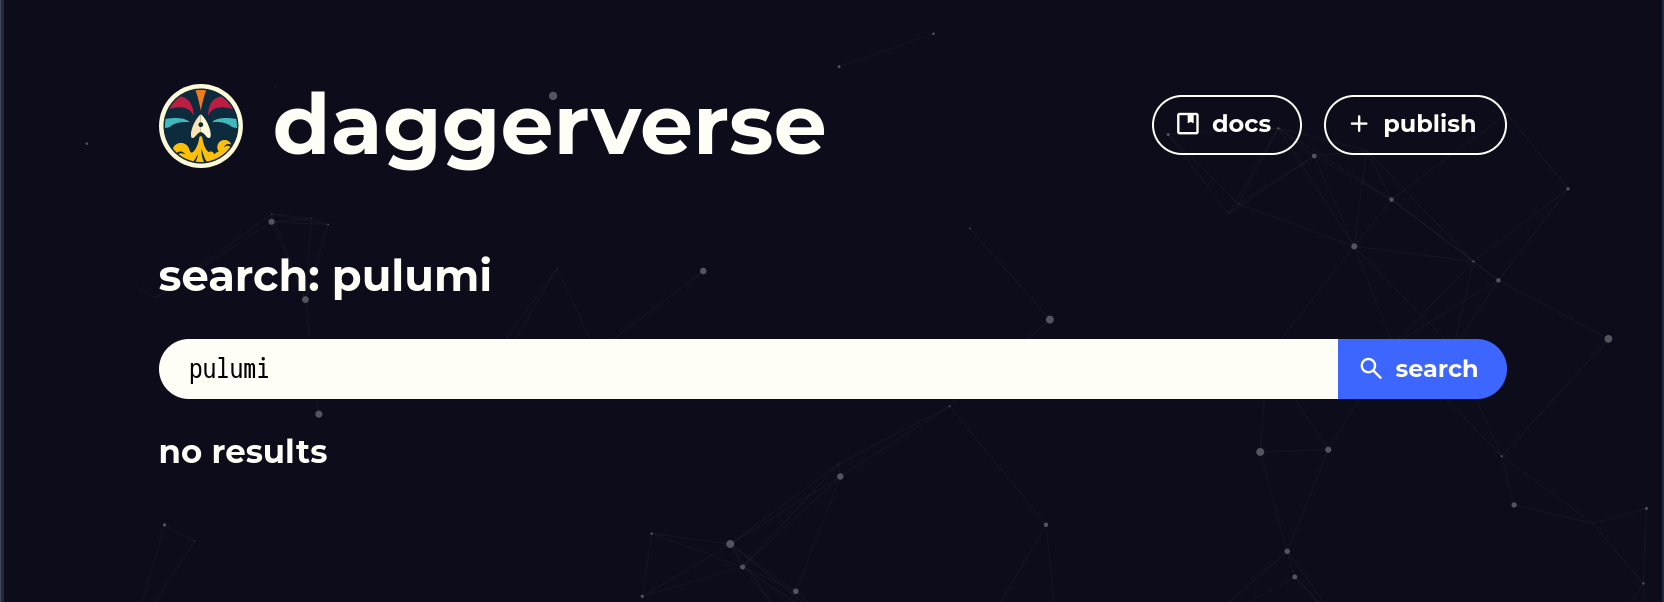 the Daggerverse website showing that there is no module for pulumi